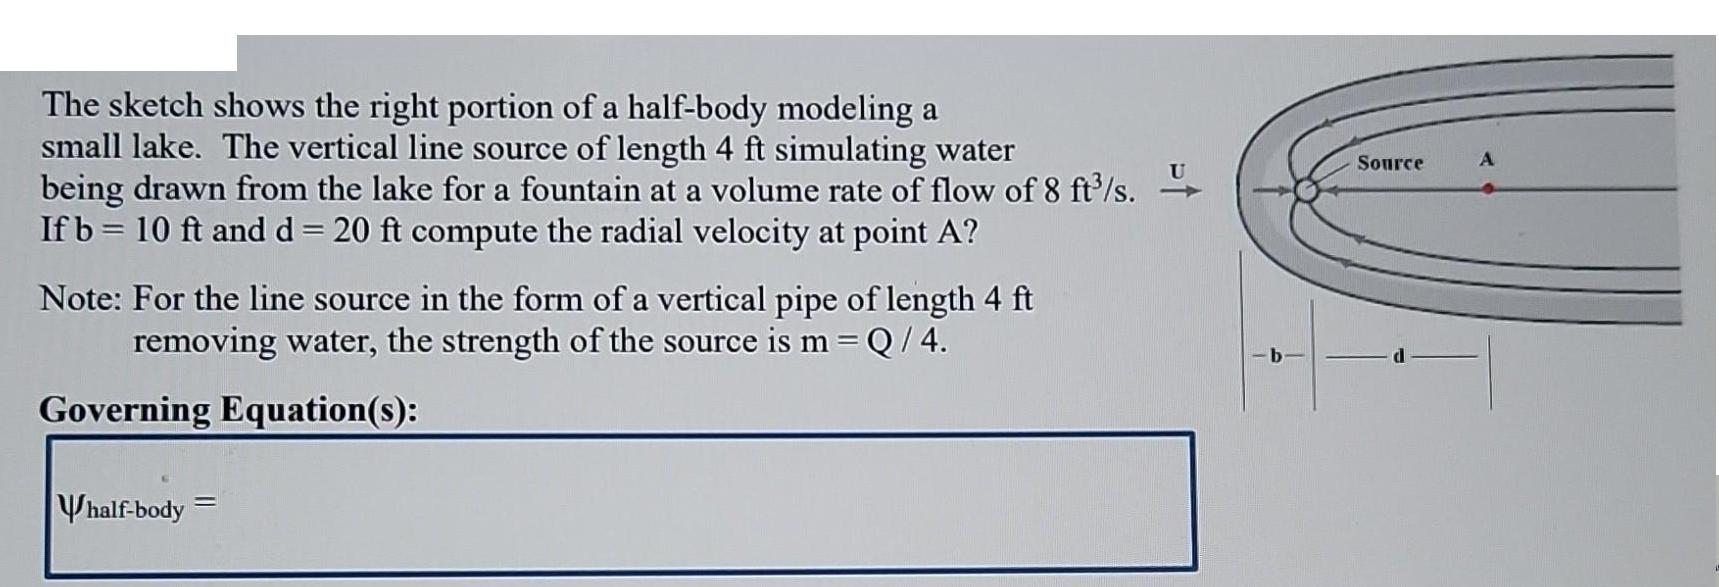 The sketch shows the right portion of a half-body modeling a small lake. The vertical line source of length 4